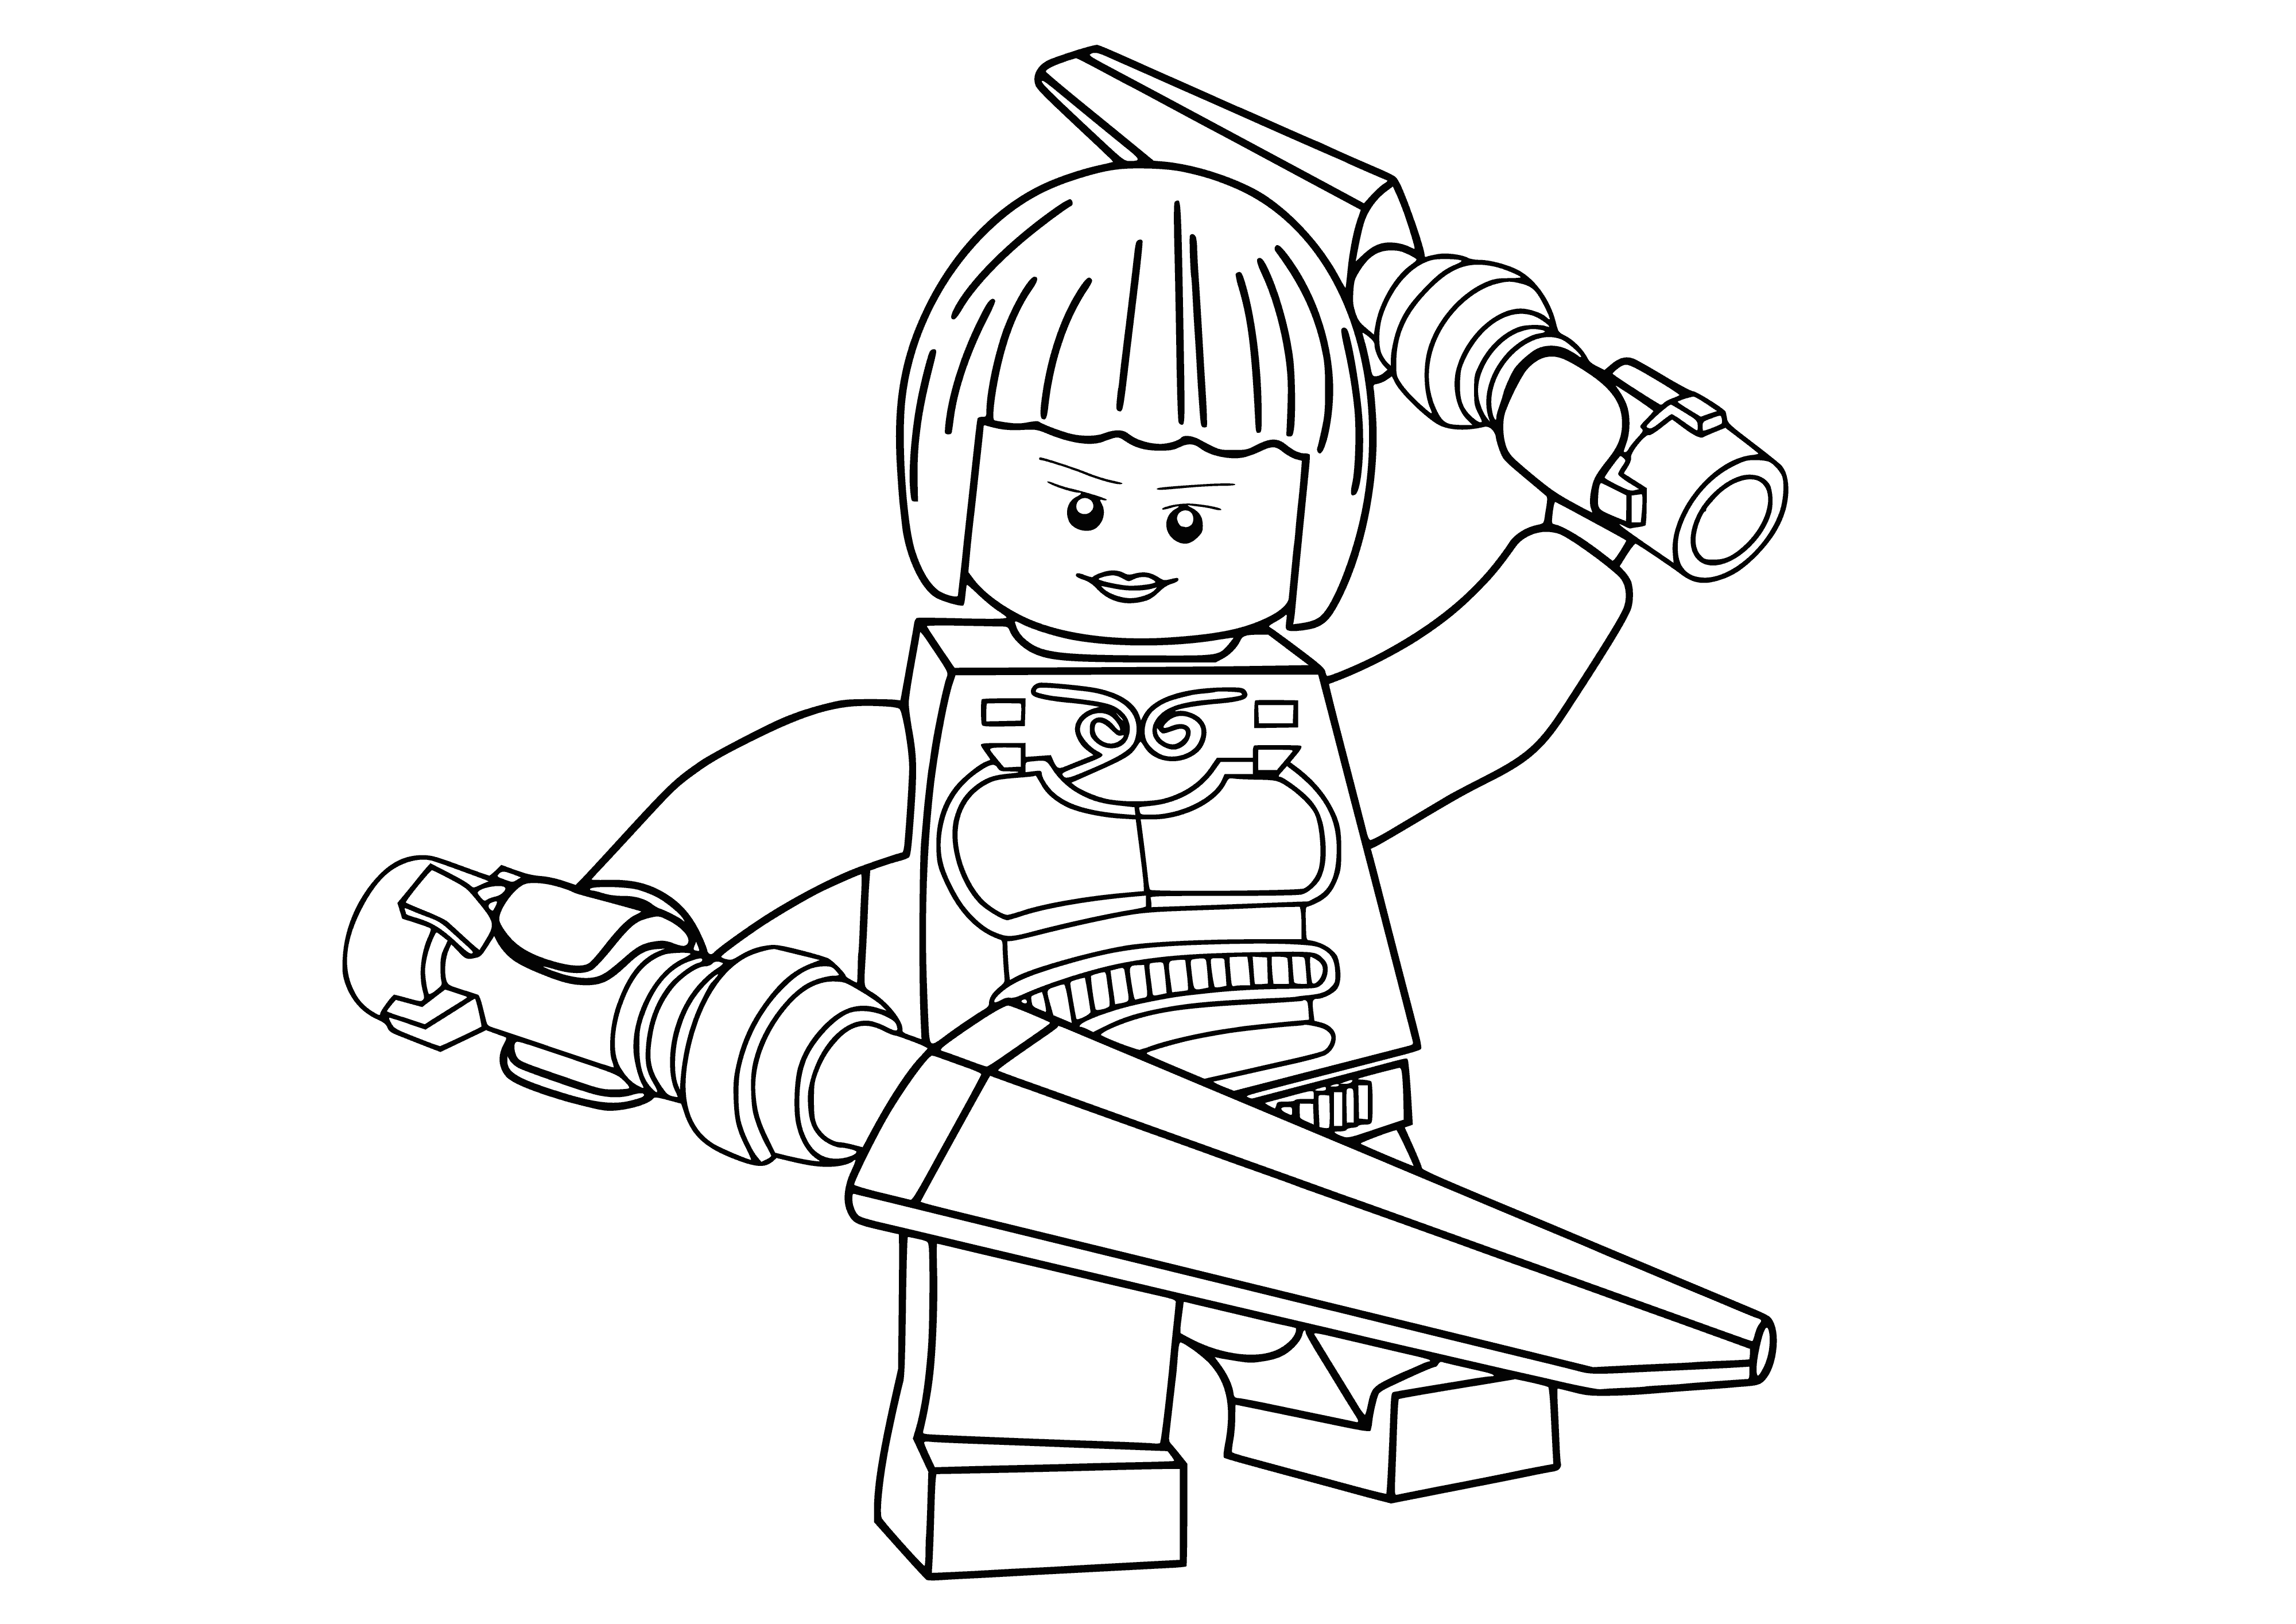 Nia coloring page